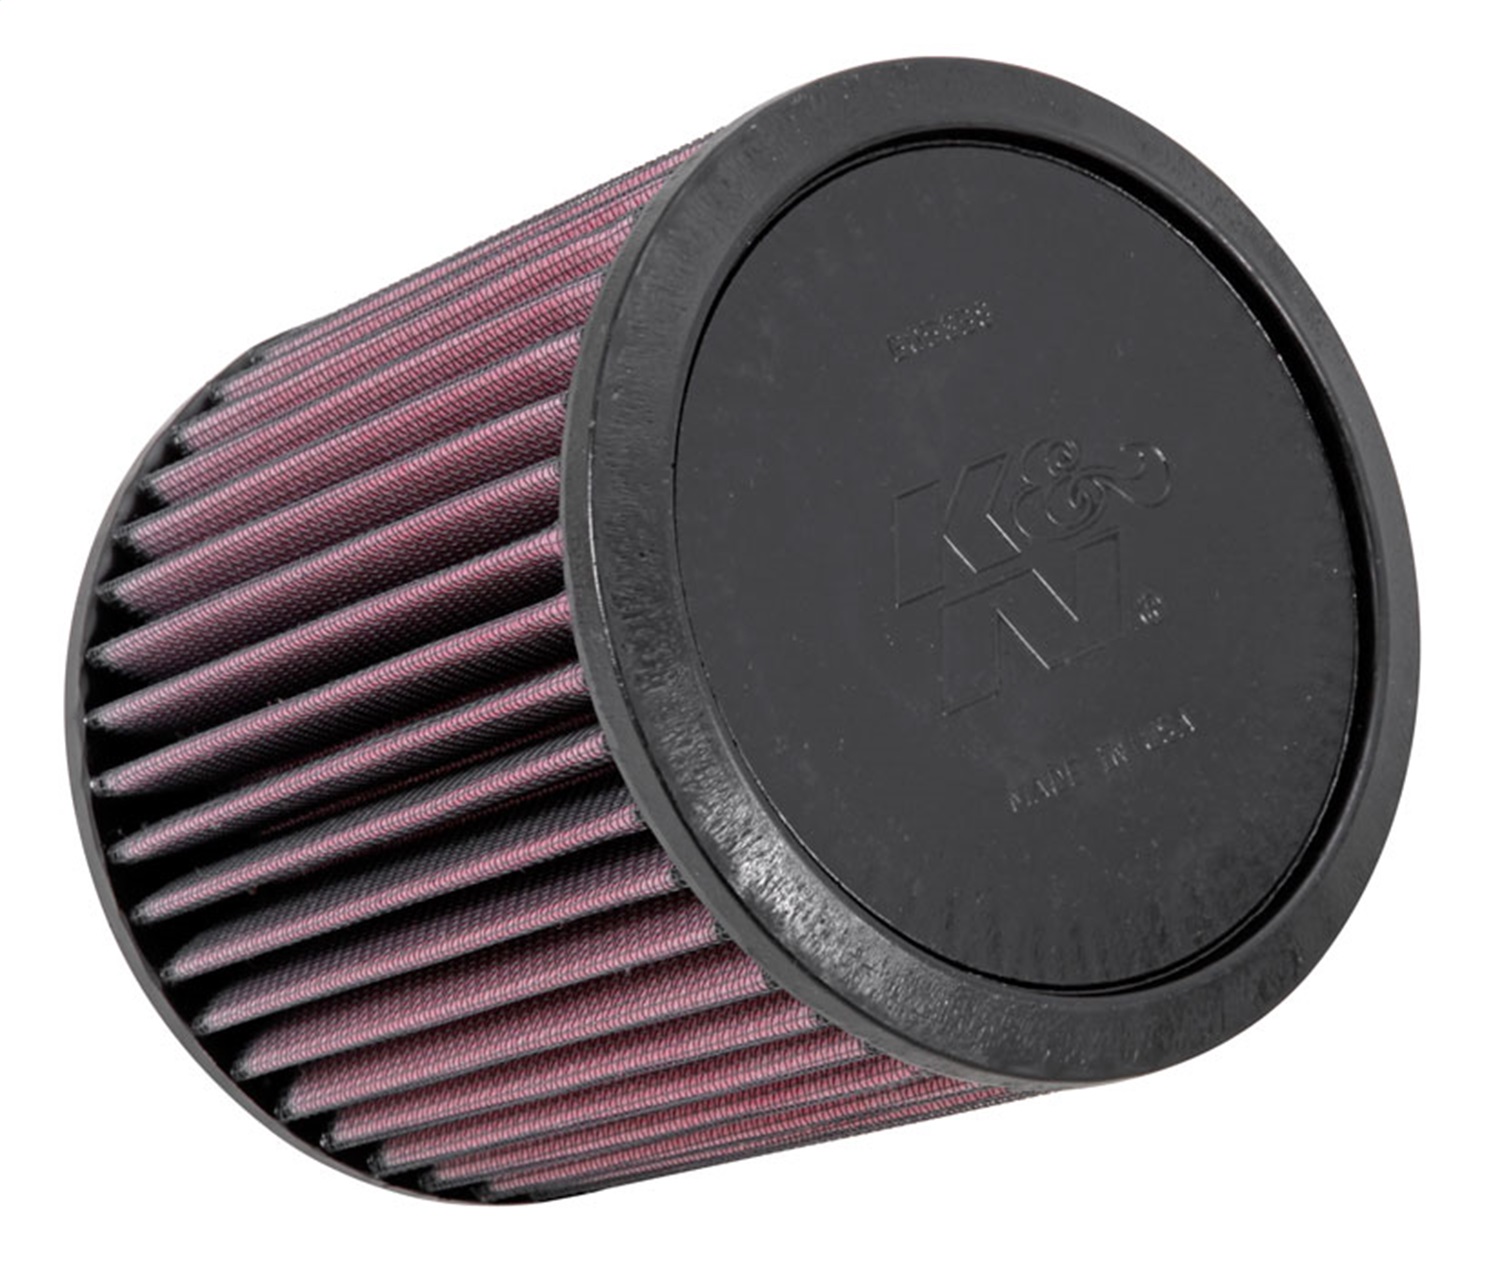 K&N Filters K&N Filters E-1006 Air Filter Fits 00-05 Neon SX 2.0